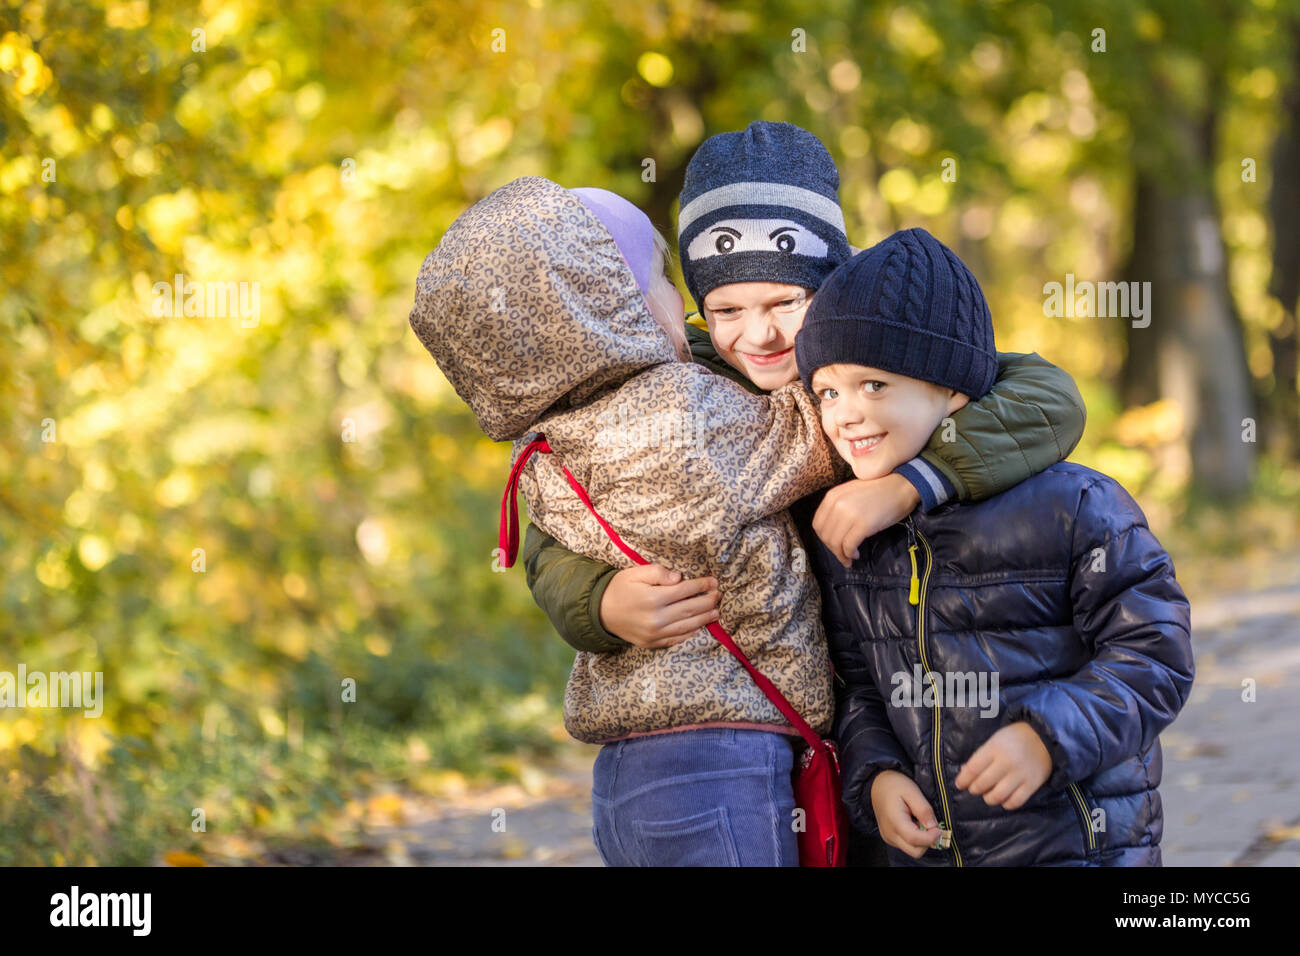 Group of happy three kids having fun outdoors in autumn park. Cute ...